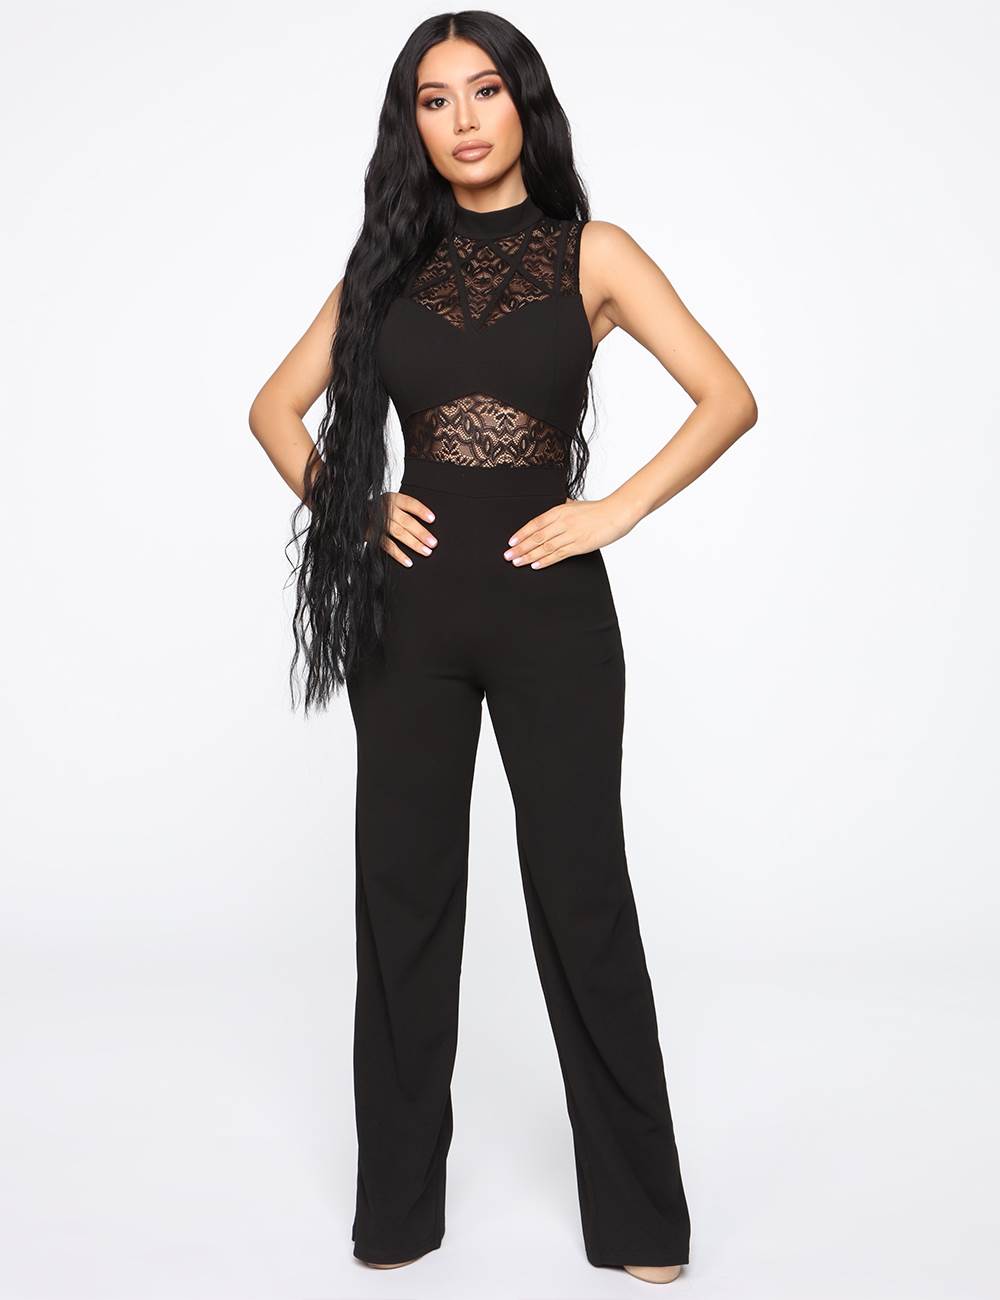 Black Hollow Lace Sleeveless High Neck Sexy Jumpsuit | Ohyeah